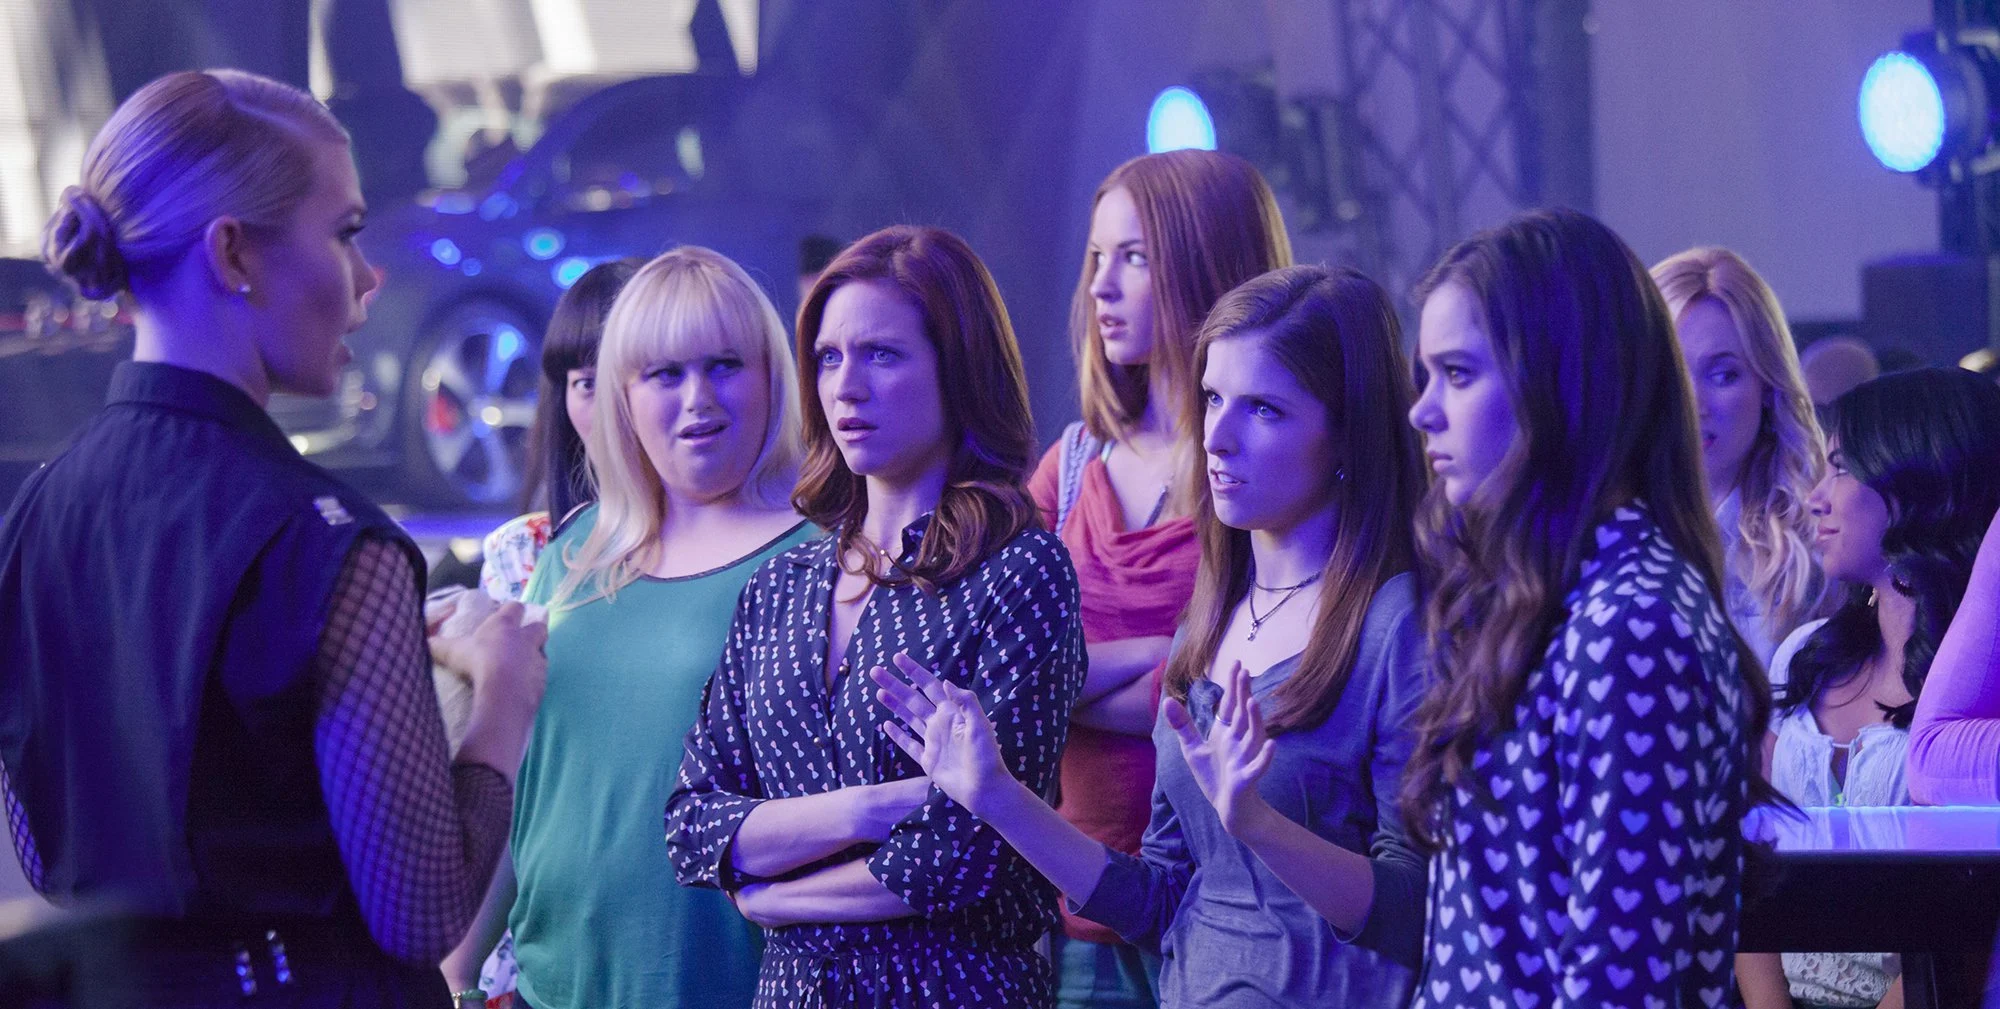 How To Watch Pitch Perfect 2